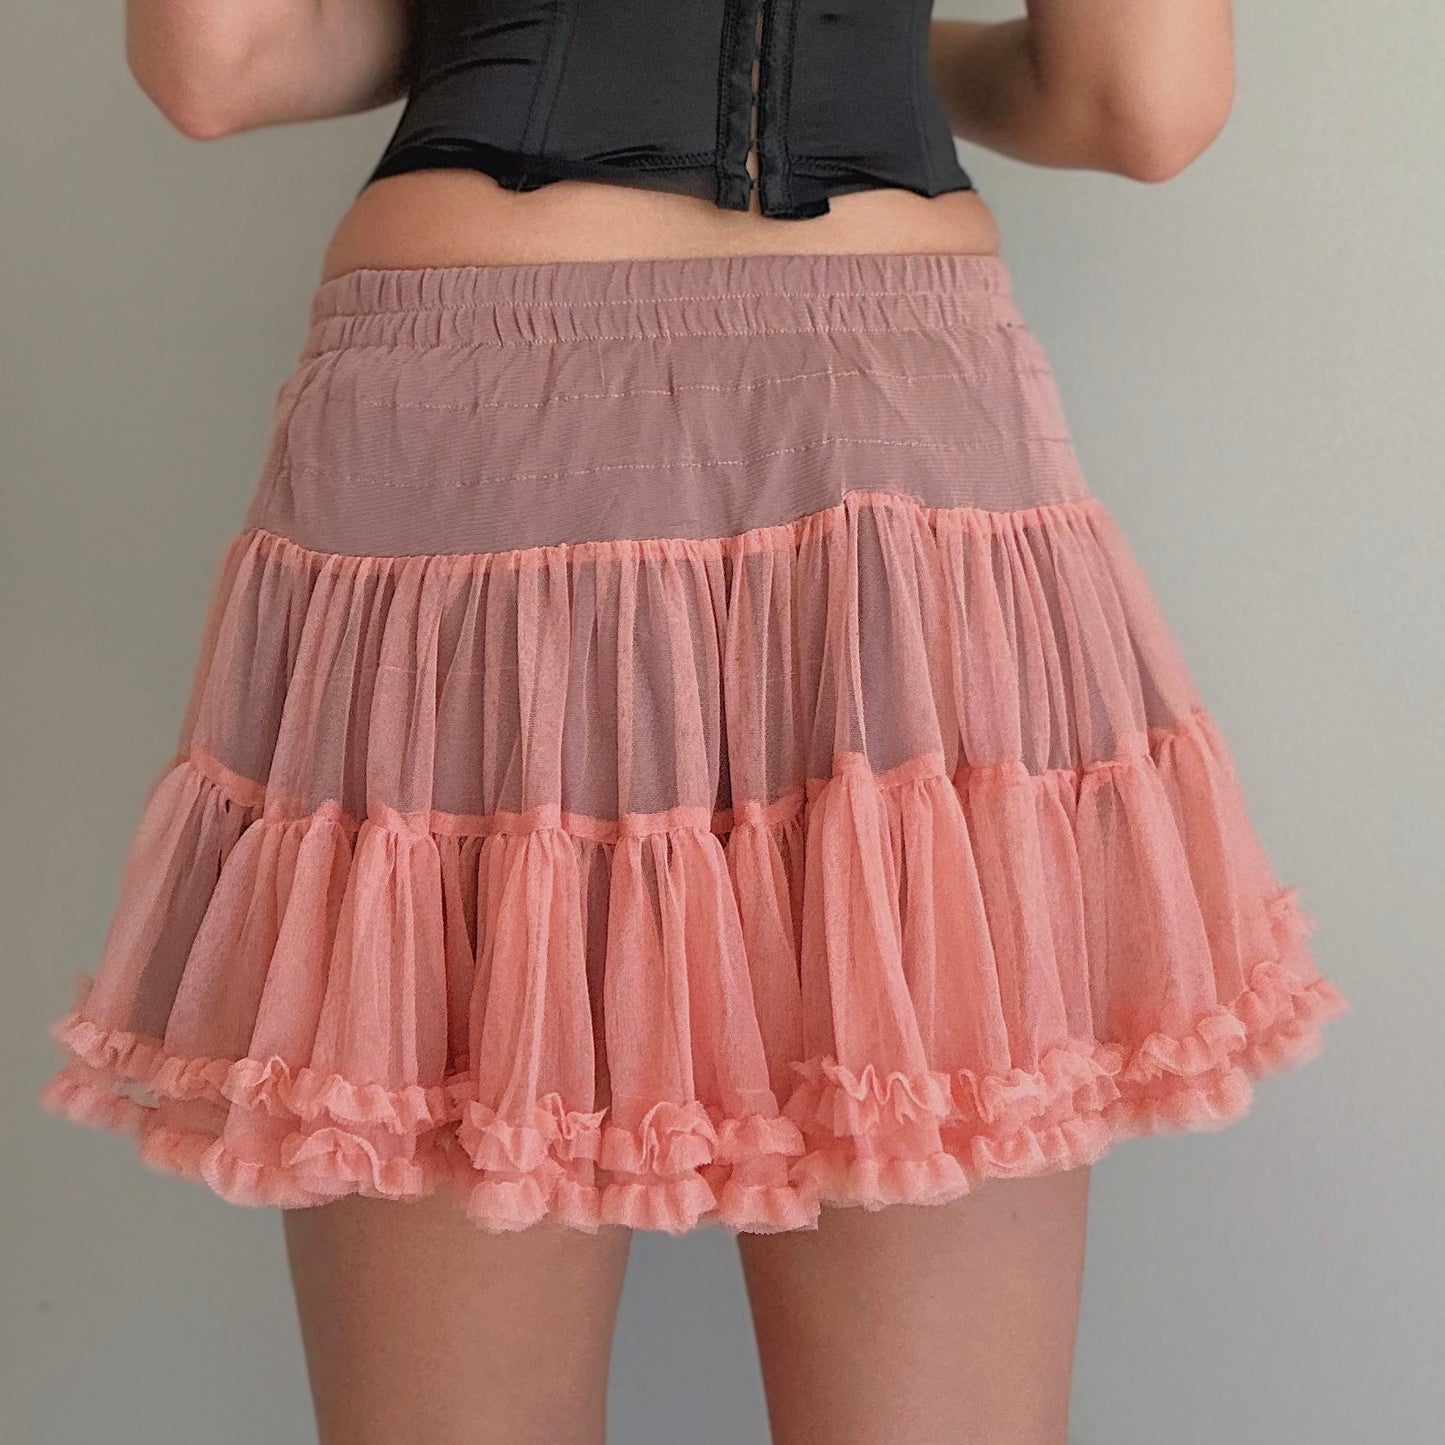 Urban Outfitters Pink Mesh Petticoat Skirt / SZ S/M